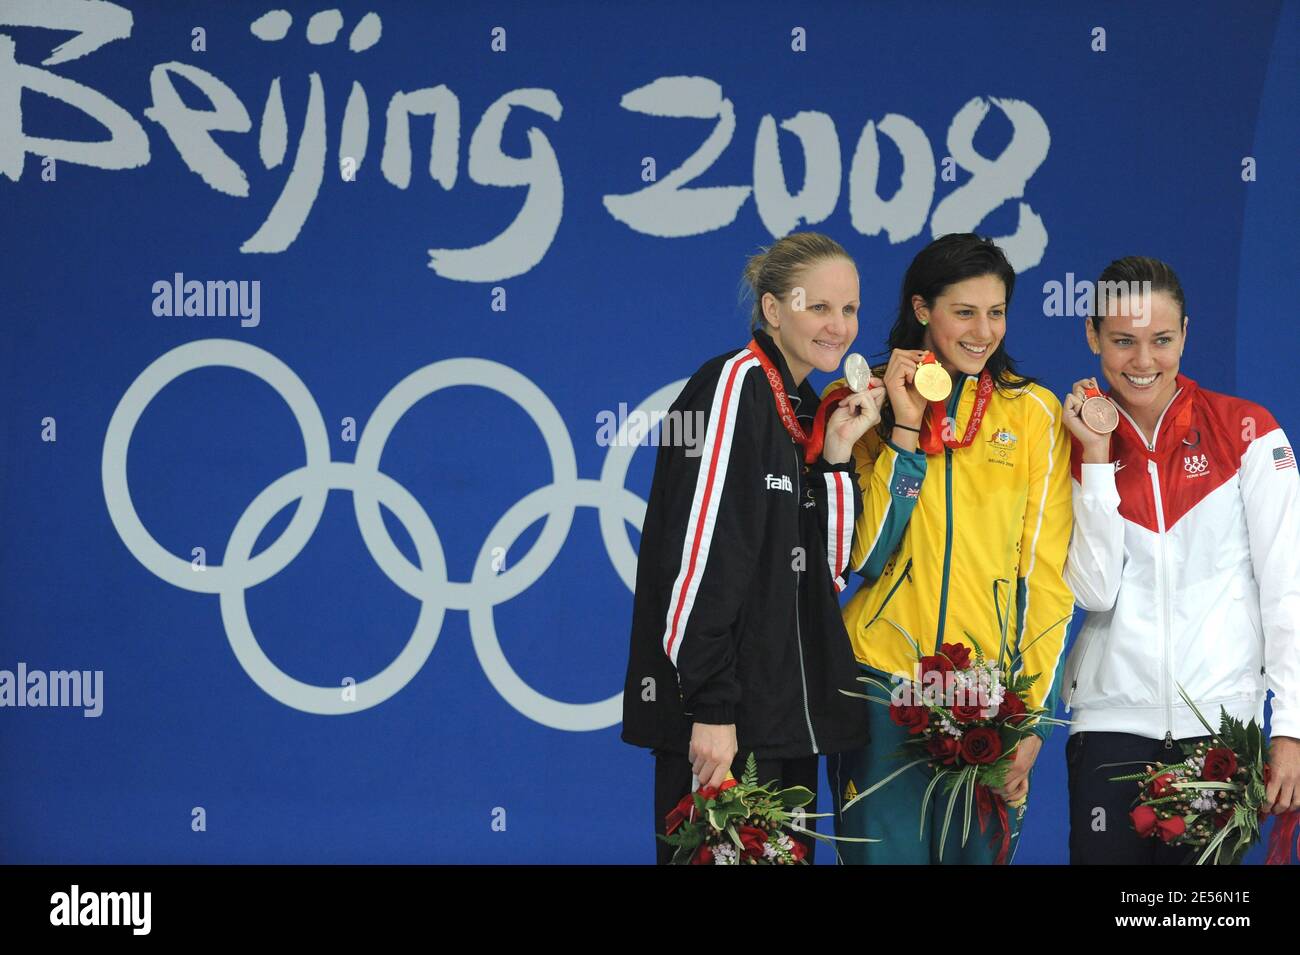 (L-R) Silver medalist Kirsty Coventry of Zimbabwe, gold medalist Stephanie Rice of Australia and bronze medalist Natalie Coughlin of the United States stand on the podium during the medal ceremony for the Women's 200m Individual Medley held at the National Aquatics Center on Day 5 of the Beijing 2008 Olympic Games on August 13, 2008 in Beijing, China. Photo by Gouhier-Hahn-Nebinger/Cameleon/ABACAPRESS.COM Stock Photo